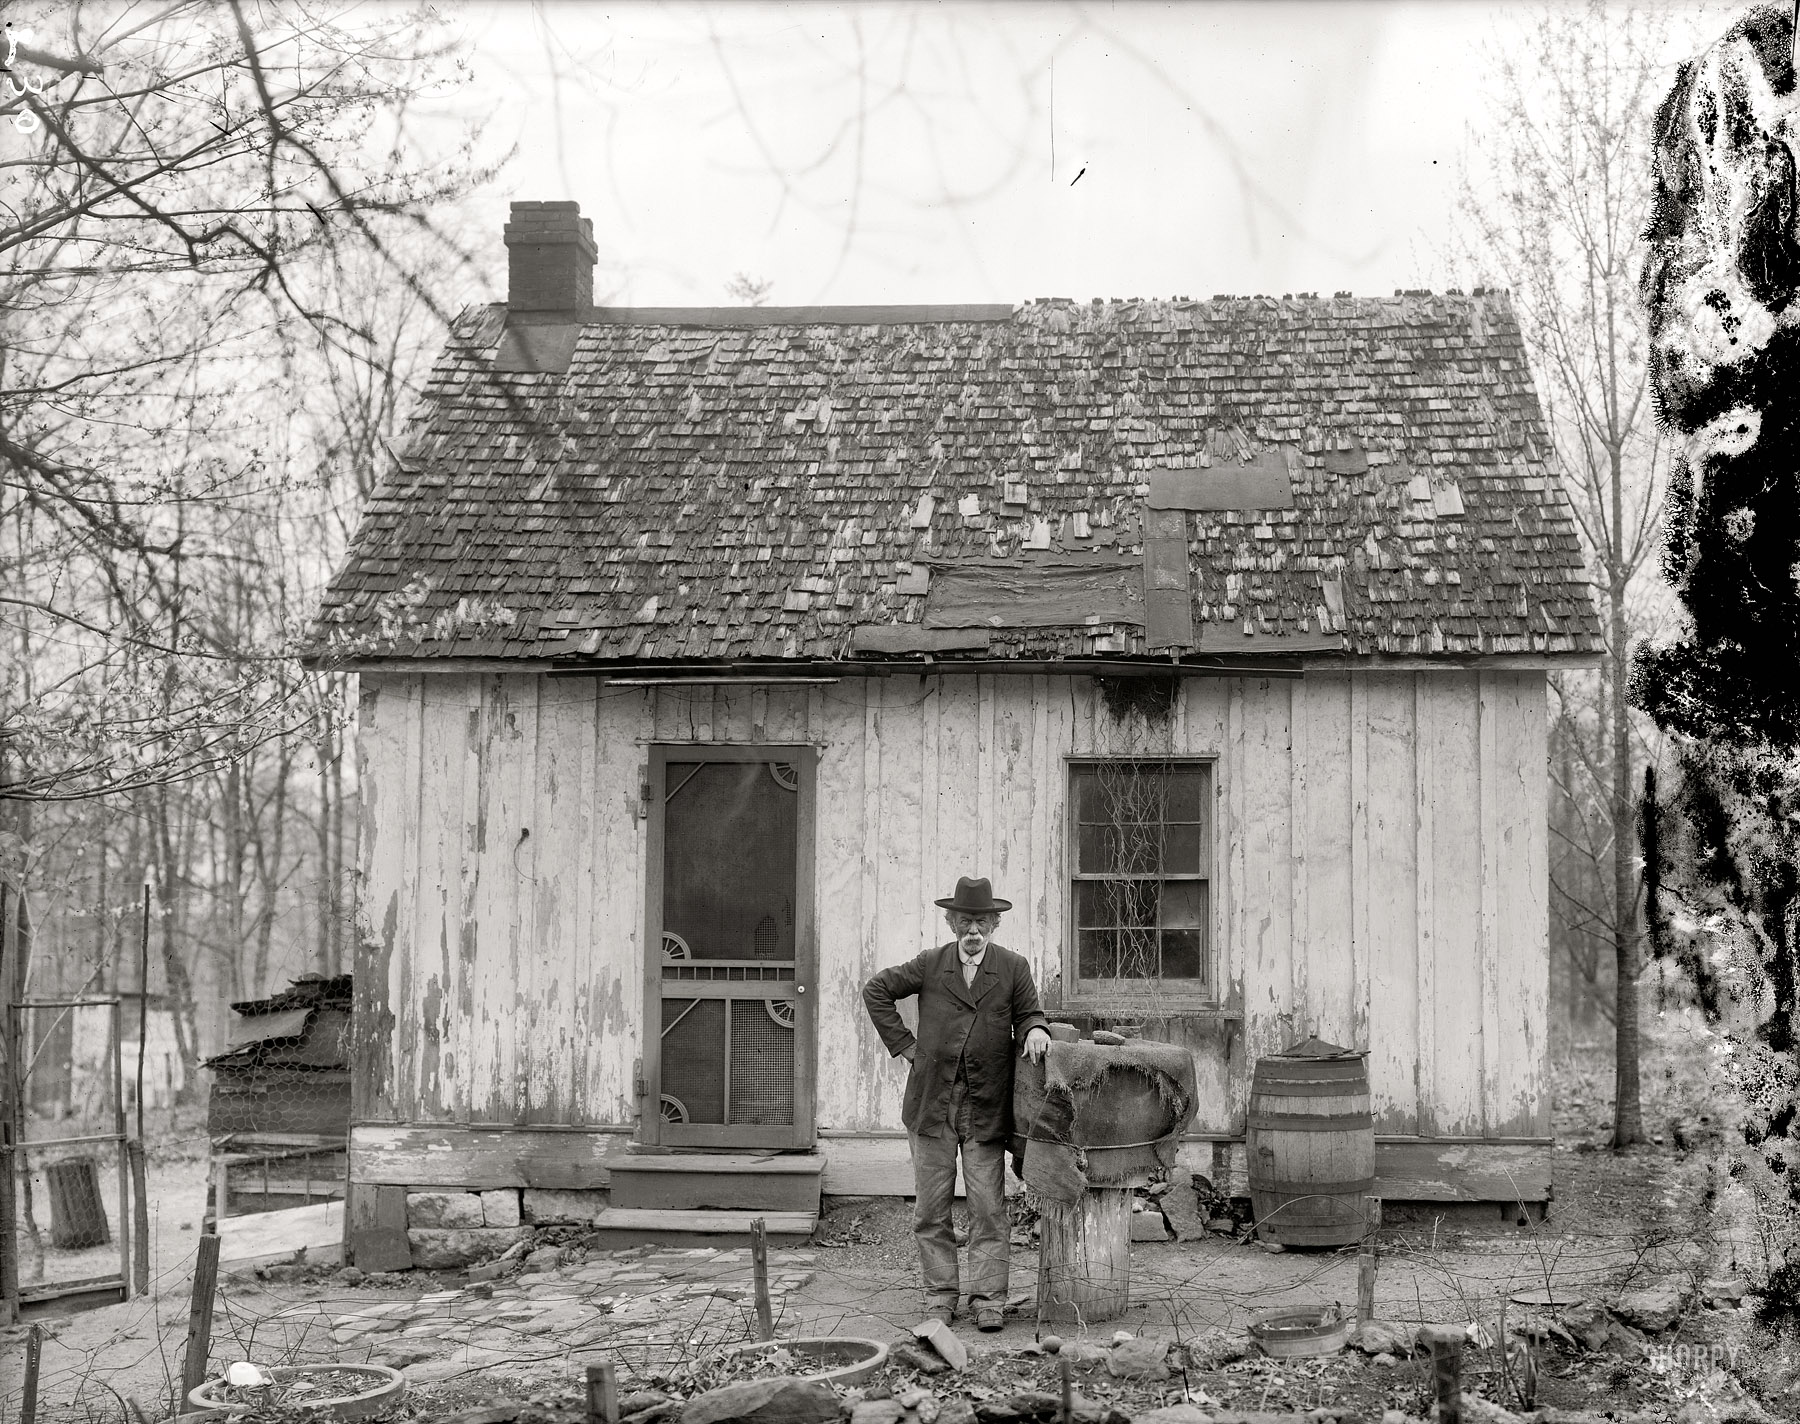 There's no caption information for this circa 1915 photo taken in or around Washington, D.C. Harris & Ewing Collection glass negative. View full size.